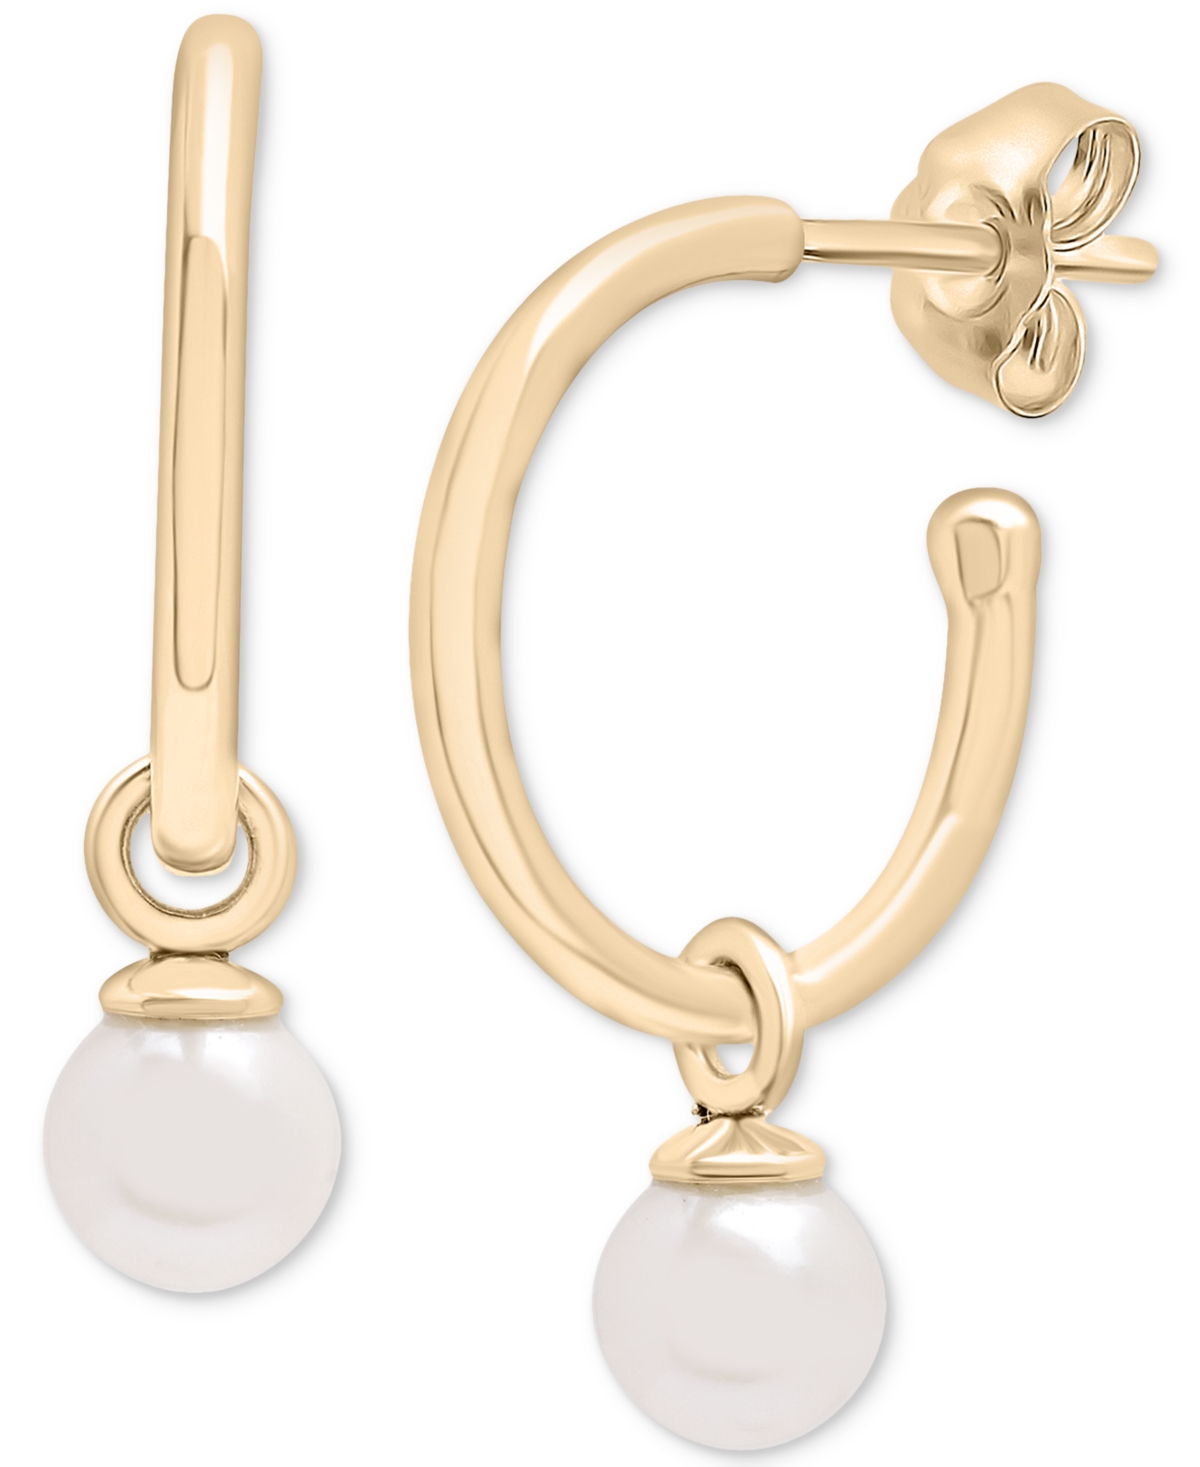 Cultured Freshwater Pearl (5mm) Dangle Small Hoop Earrings in Gold Vermeil, Created for Macy's - Gold Vermeil